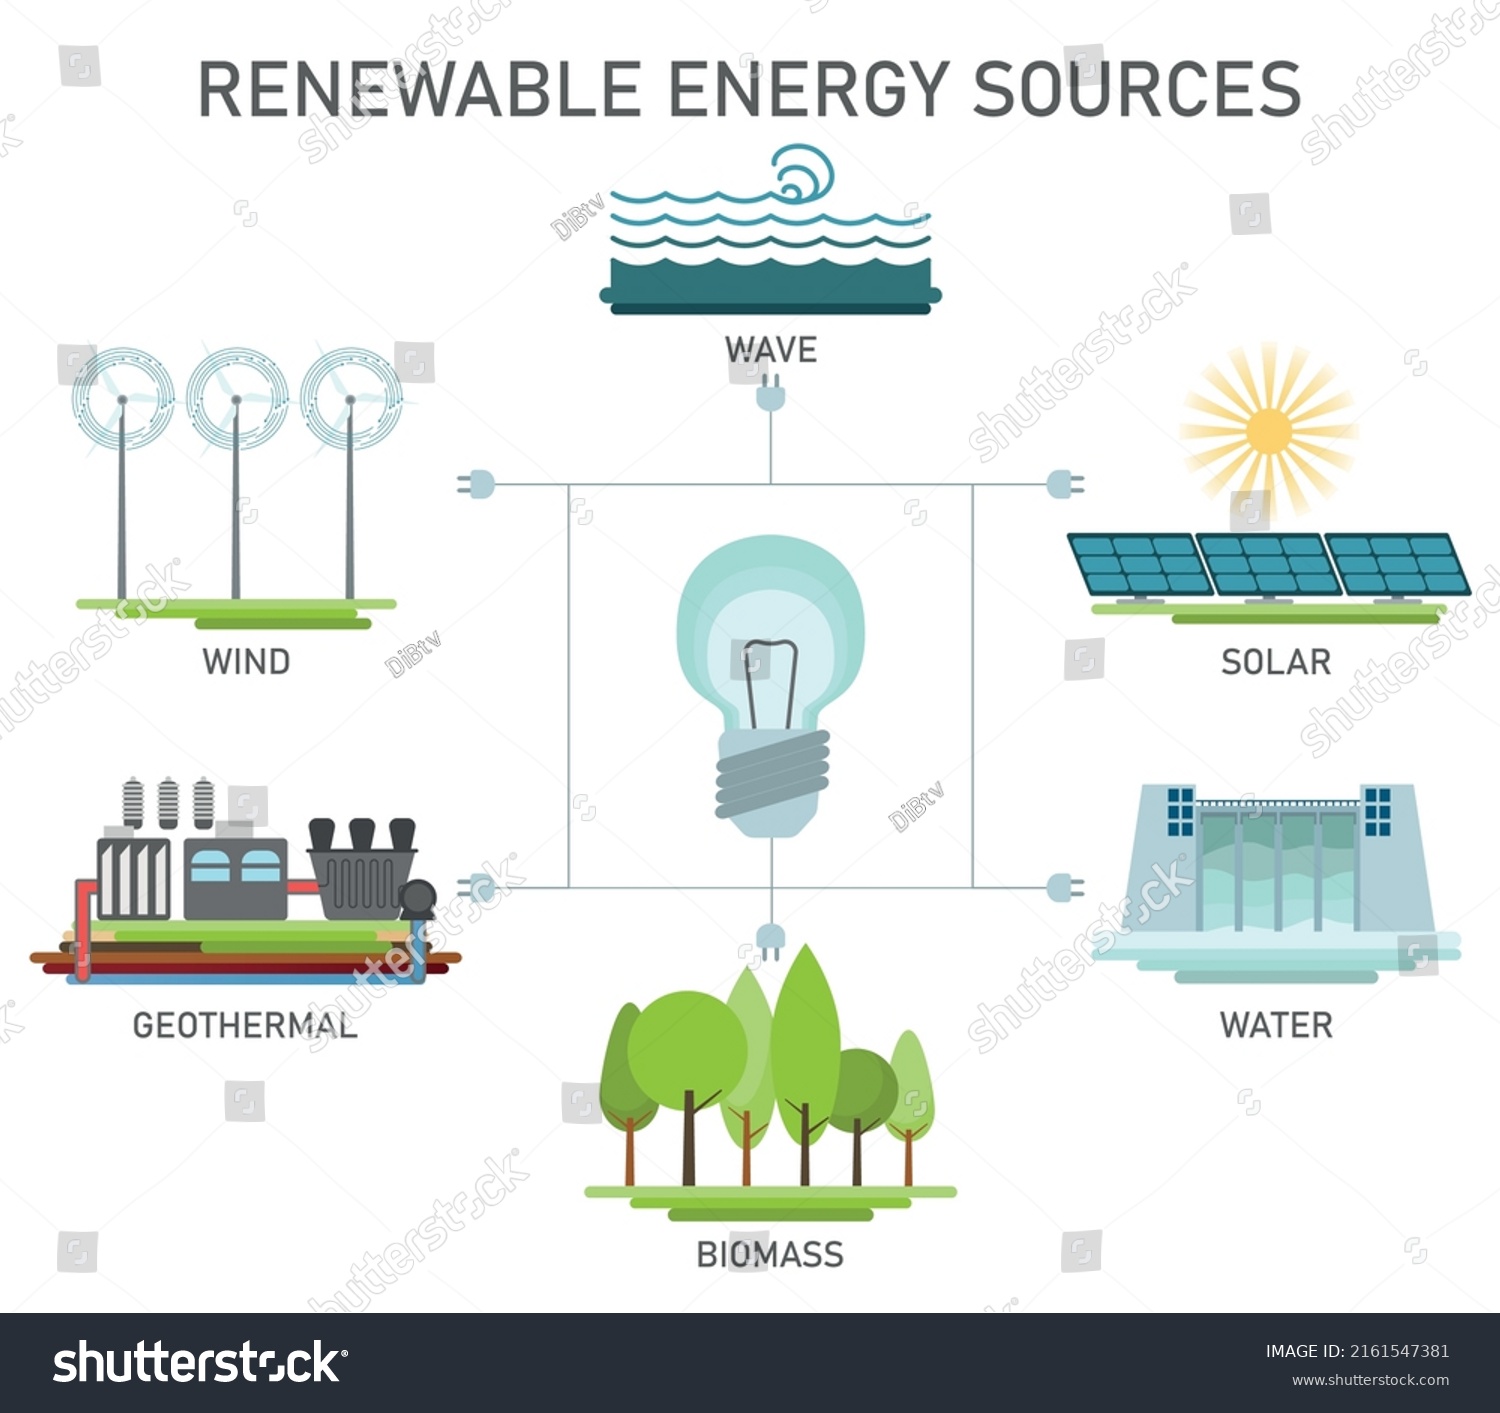 Renewable Energy Sources Colored Vector Illustration Stock Vector ...